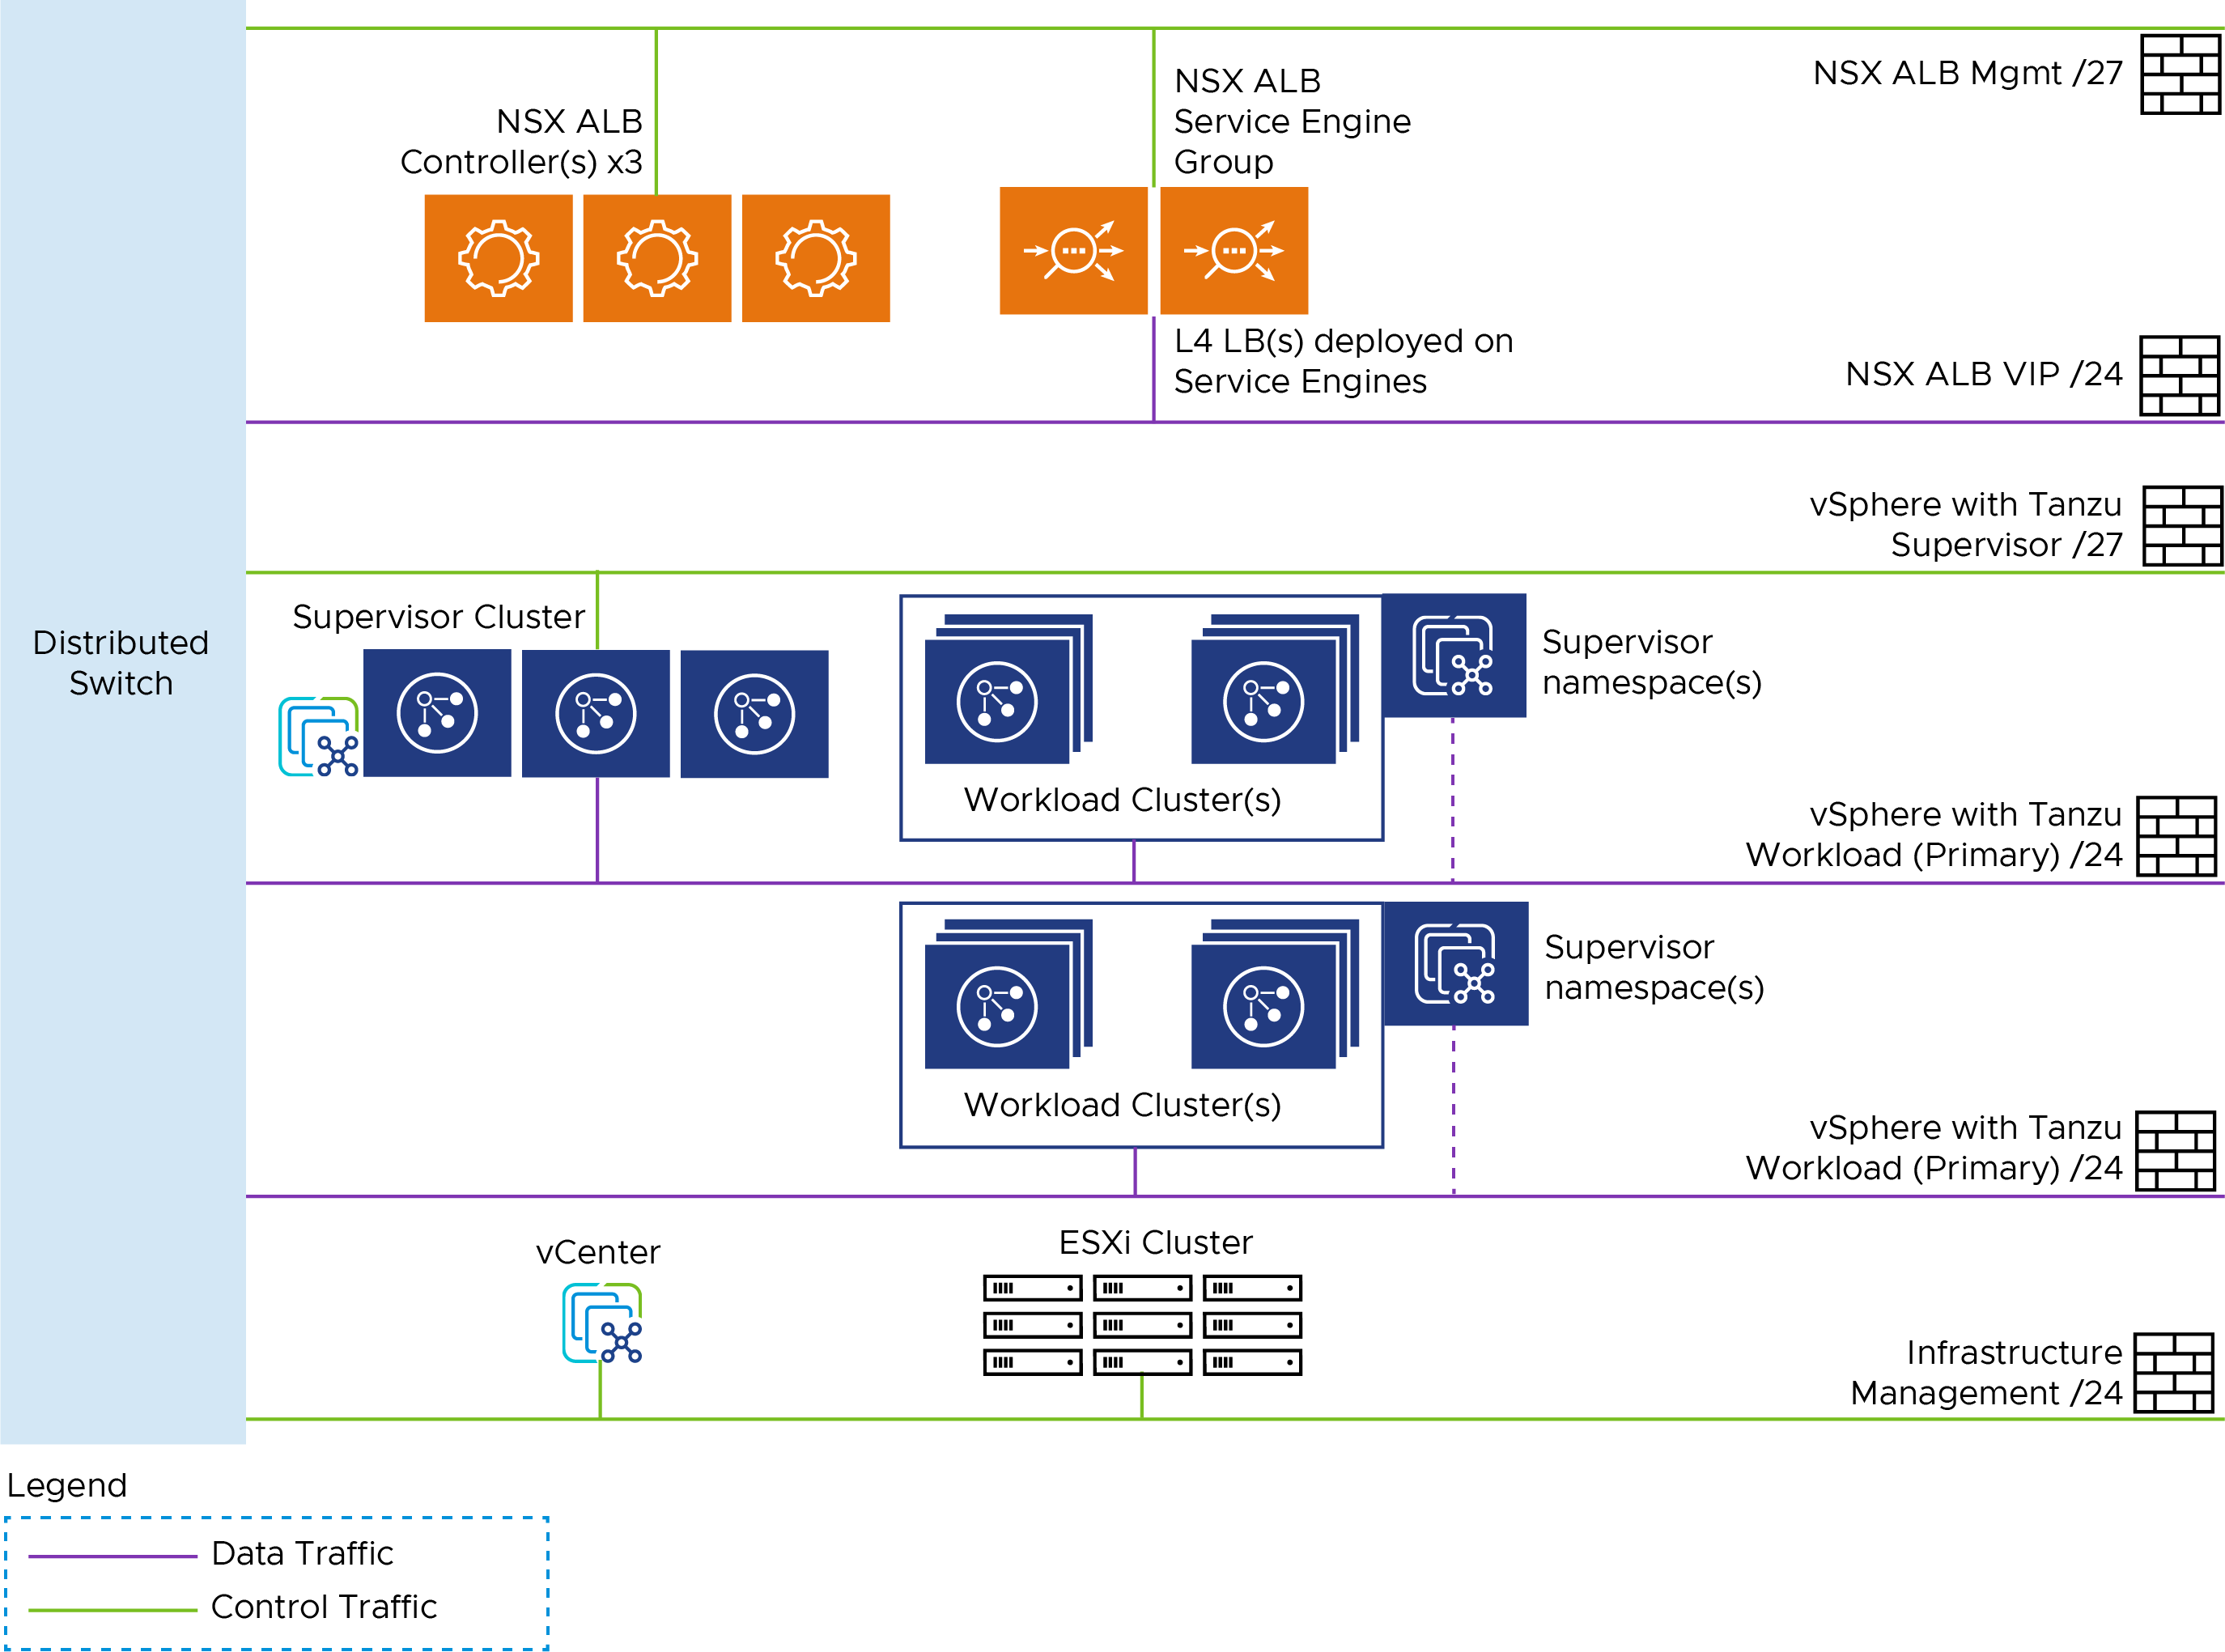 Network design for vSphere with Tanzu and VDS